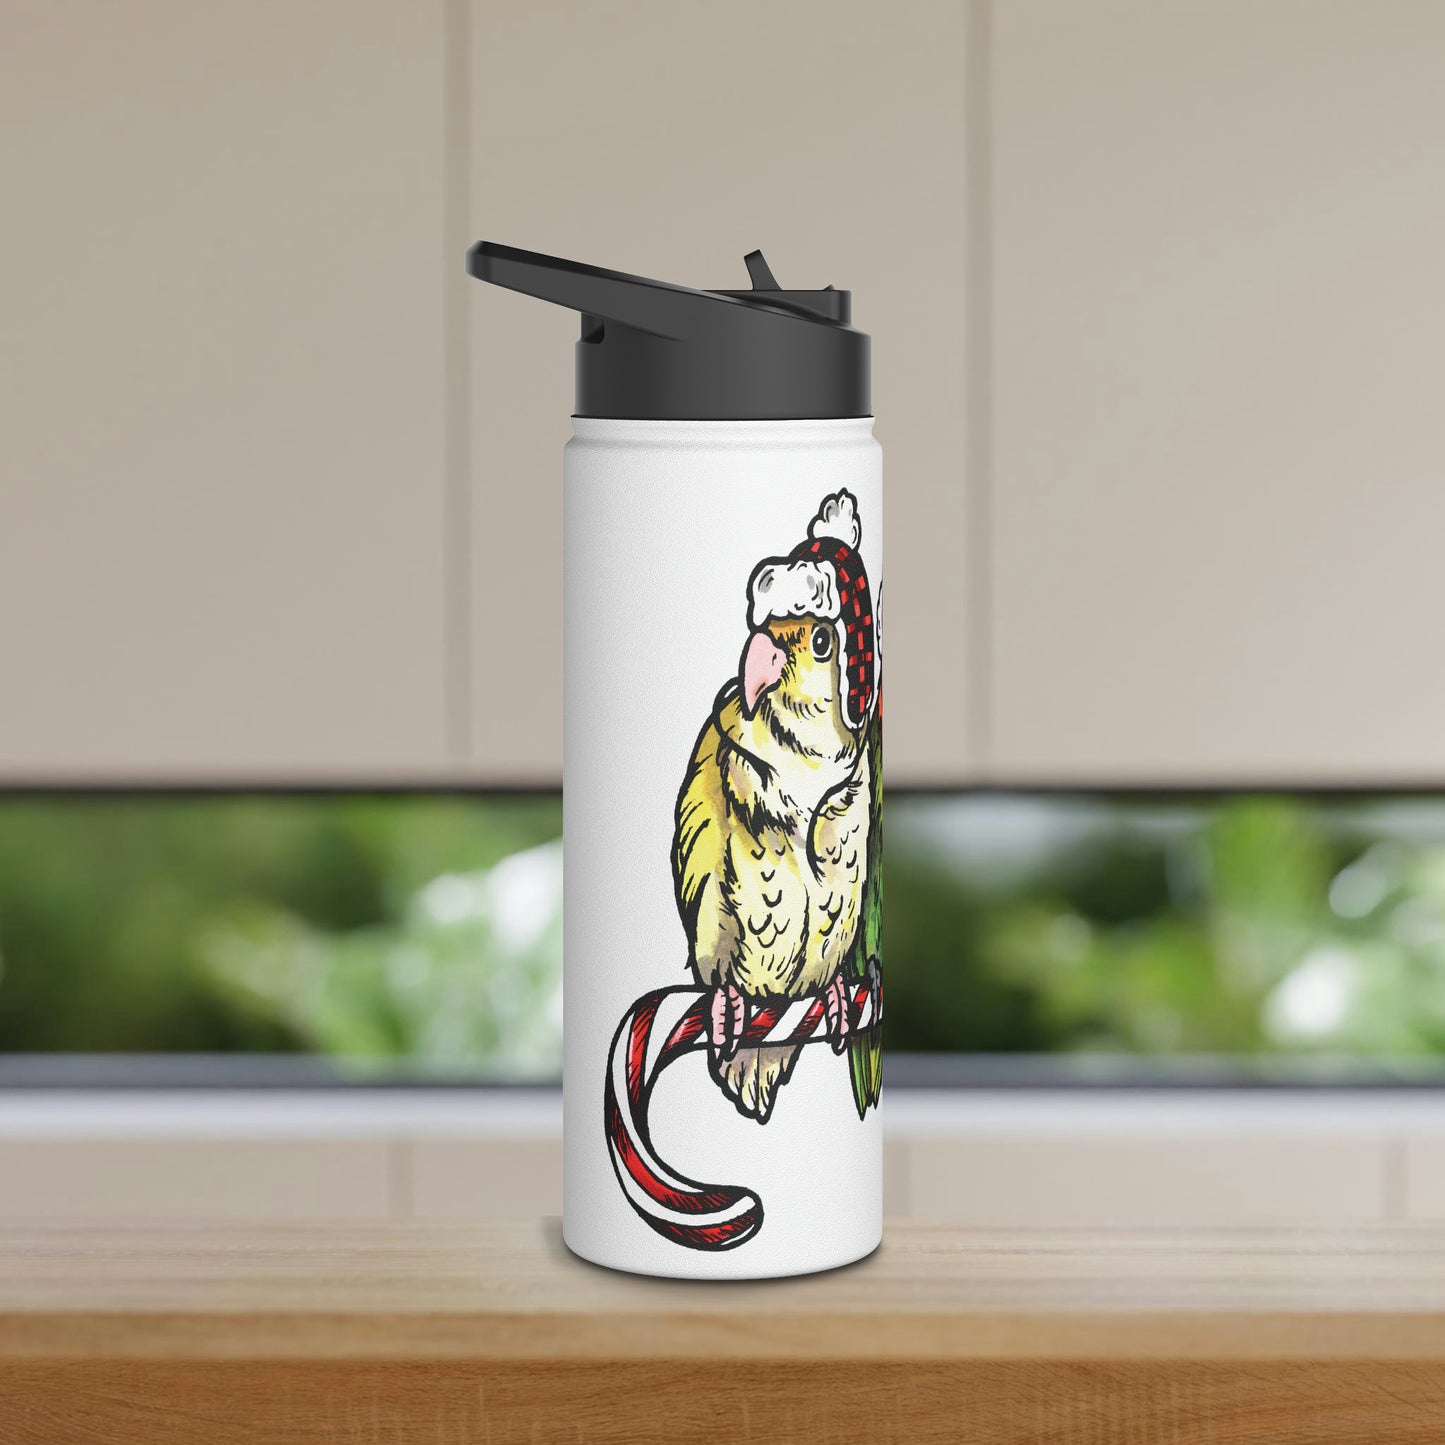 3 Lovebirds in Winter Wear & Perched on a Candy Cane, Stainless-Steel BPA-Free Water Bottle with Built-In Straw